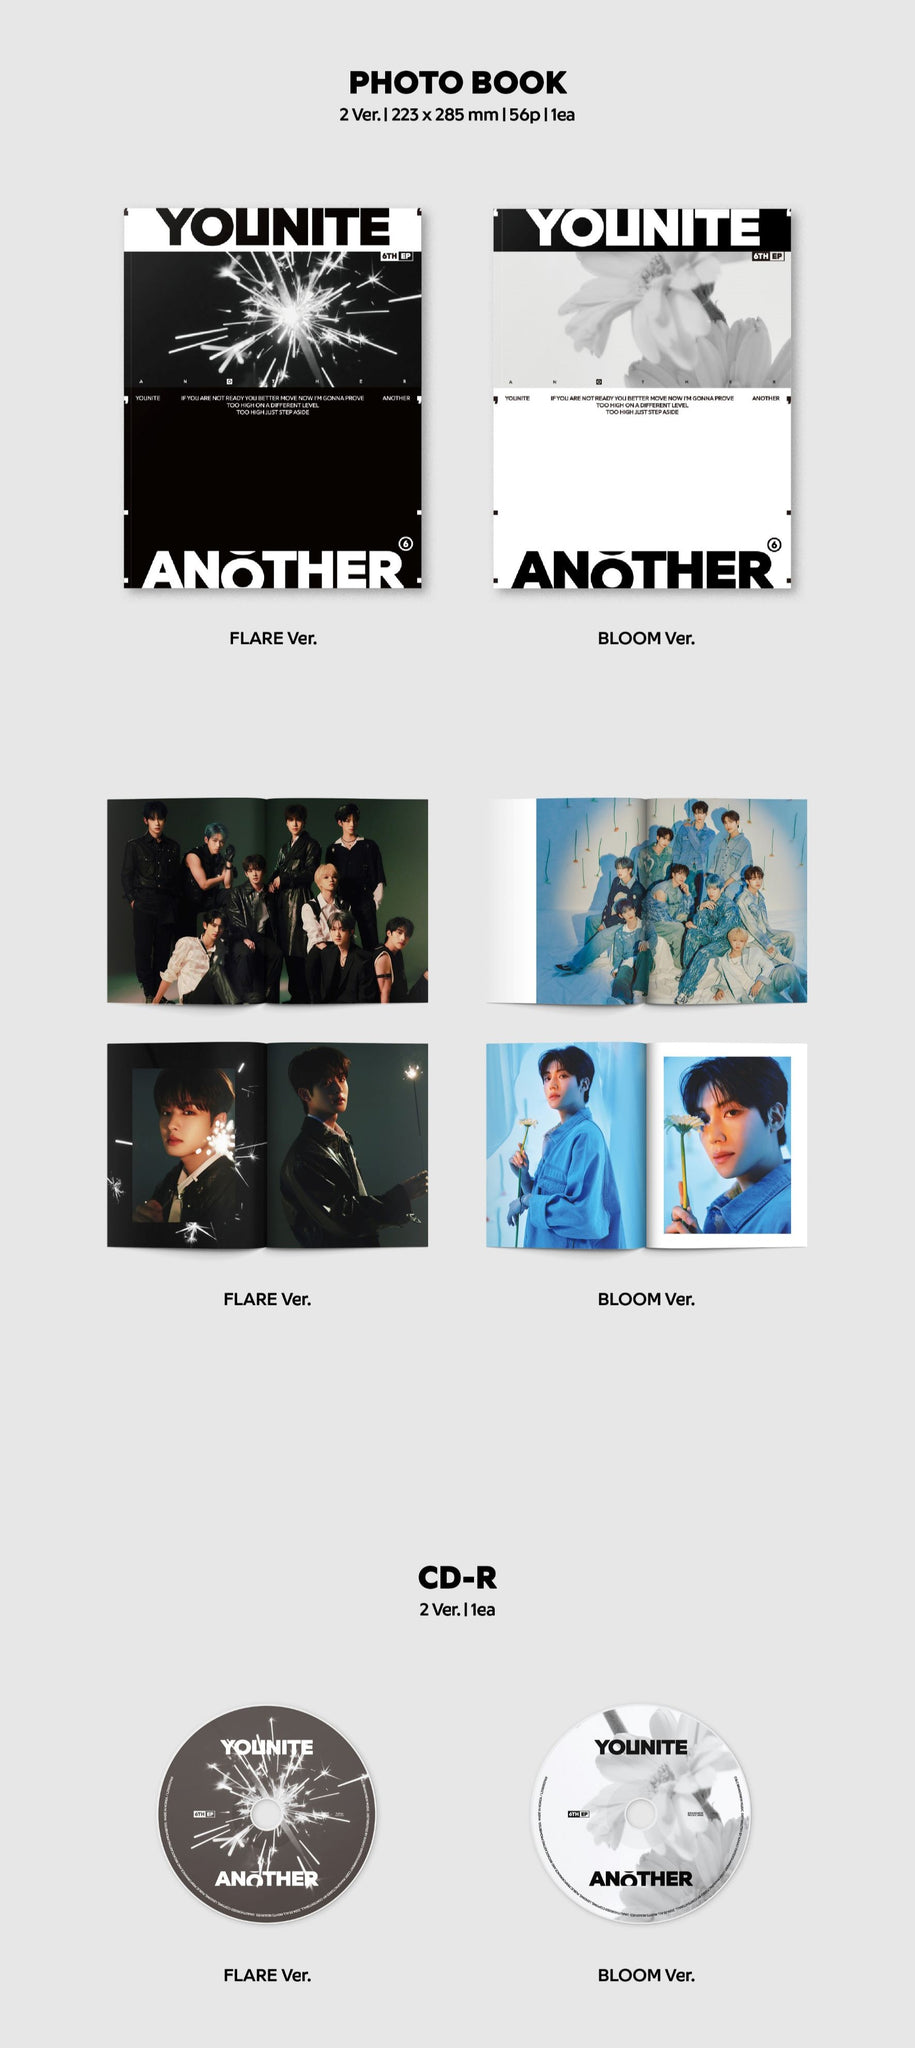 YOUNITE 6th Mini Album ANOTHER - FLARE / BLOOM Version Inclusions: Photobook, CD